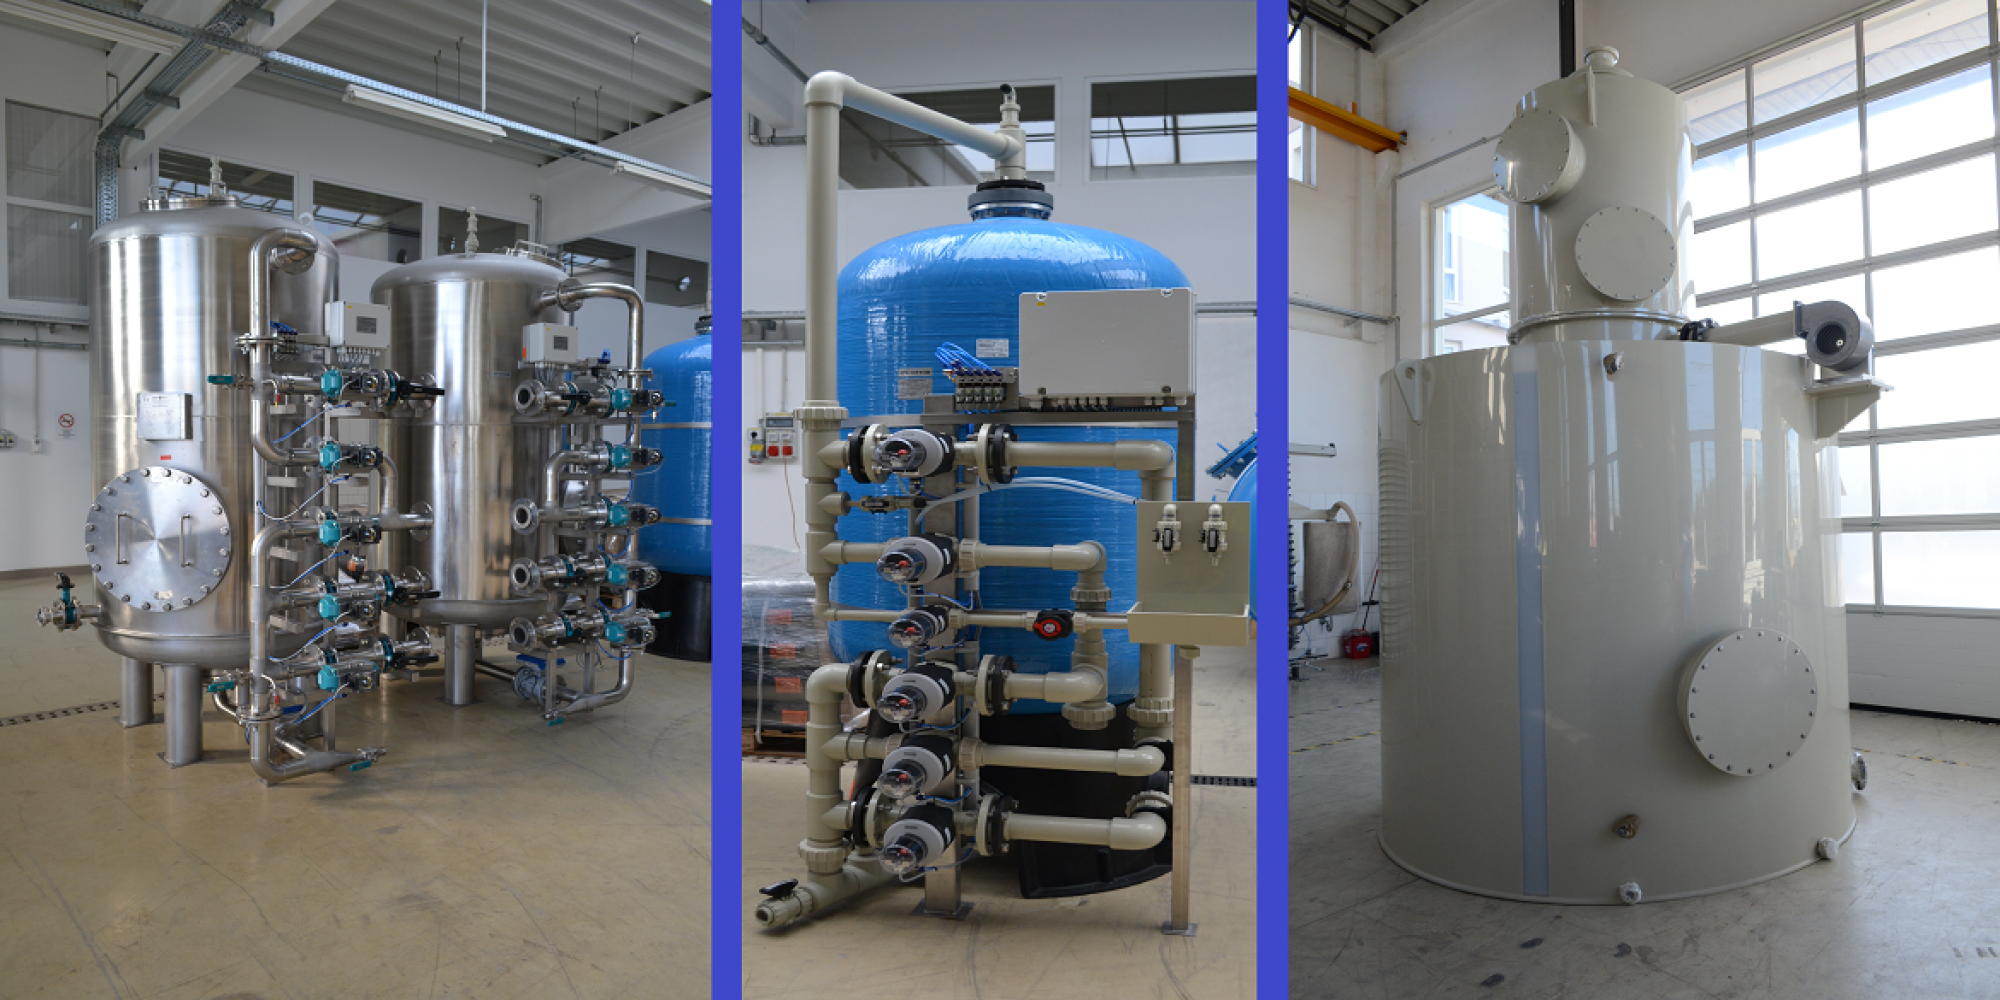 Desalination system for the oil industry and hydrogen production in Hungary